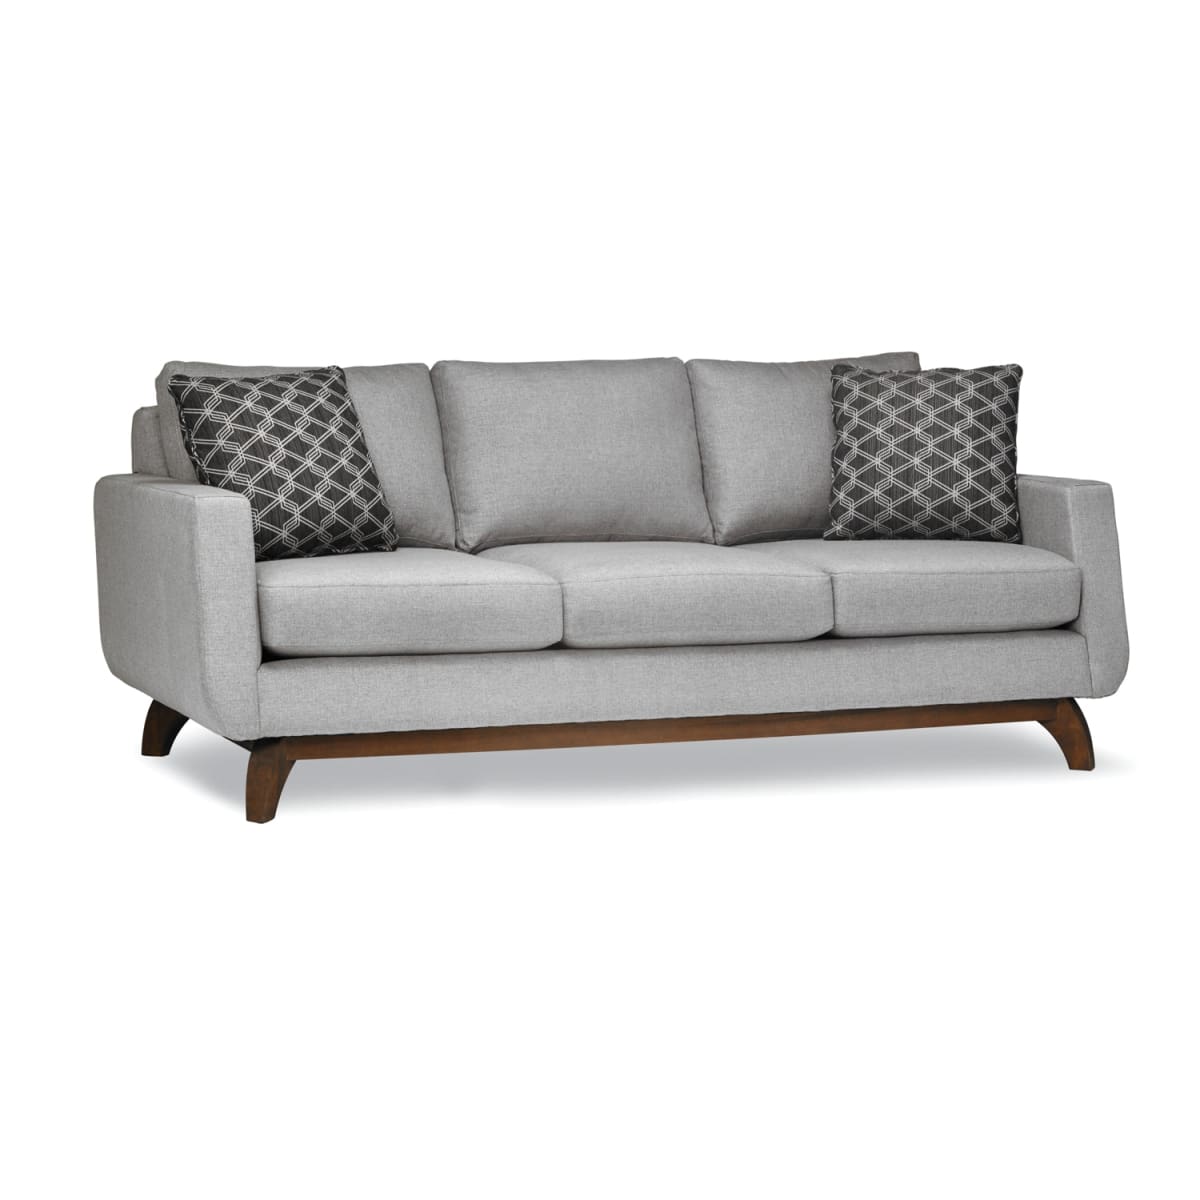 Myer Canadian Made To Order Fabric Sofa - Sofa